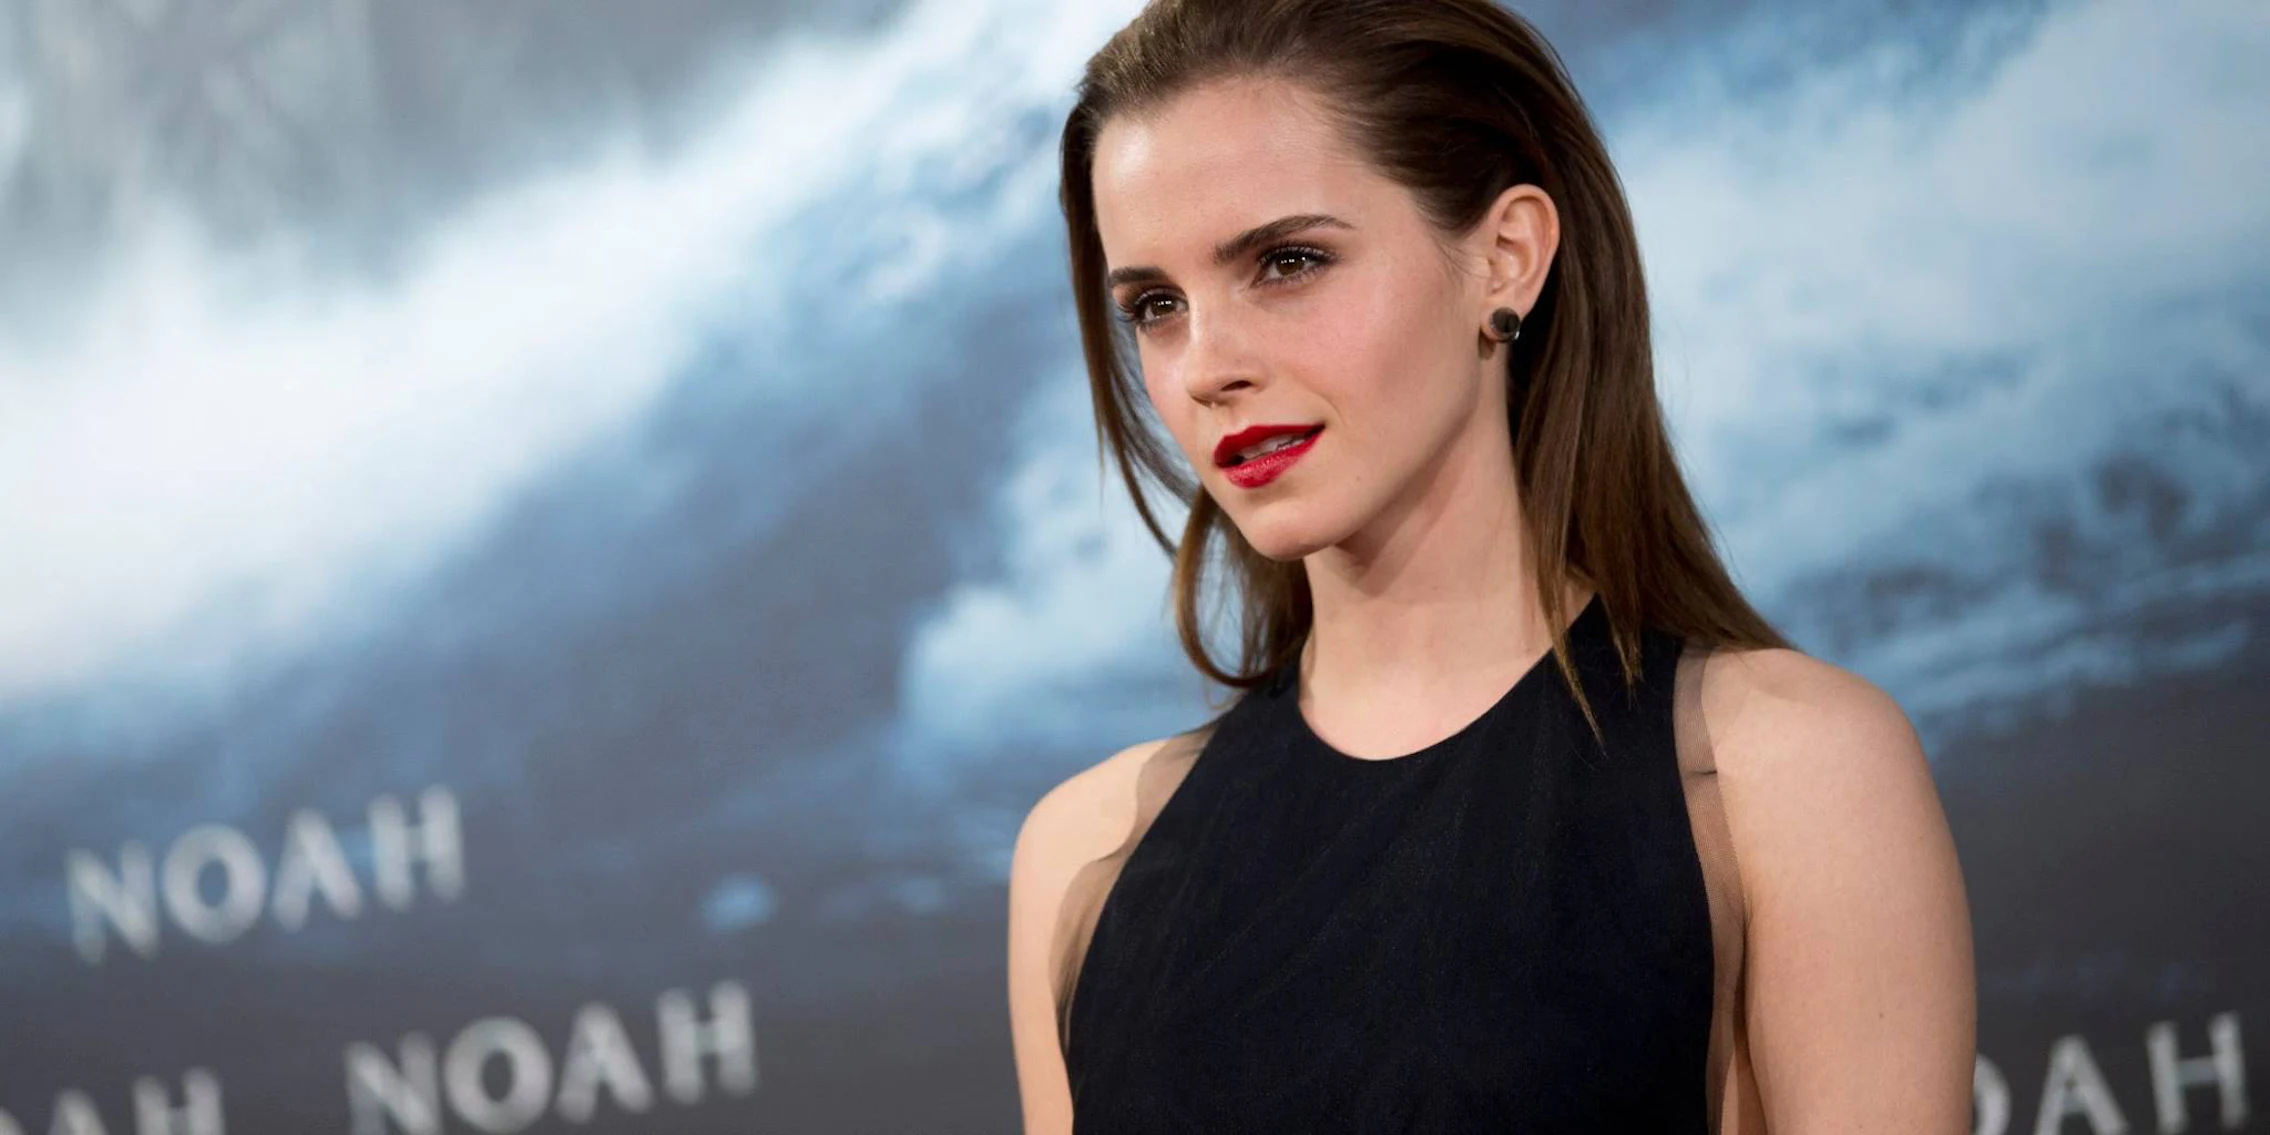 Which organization did Emma Watson co-found to promote sustainable fashion?